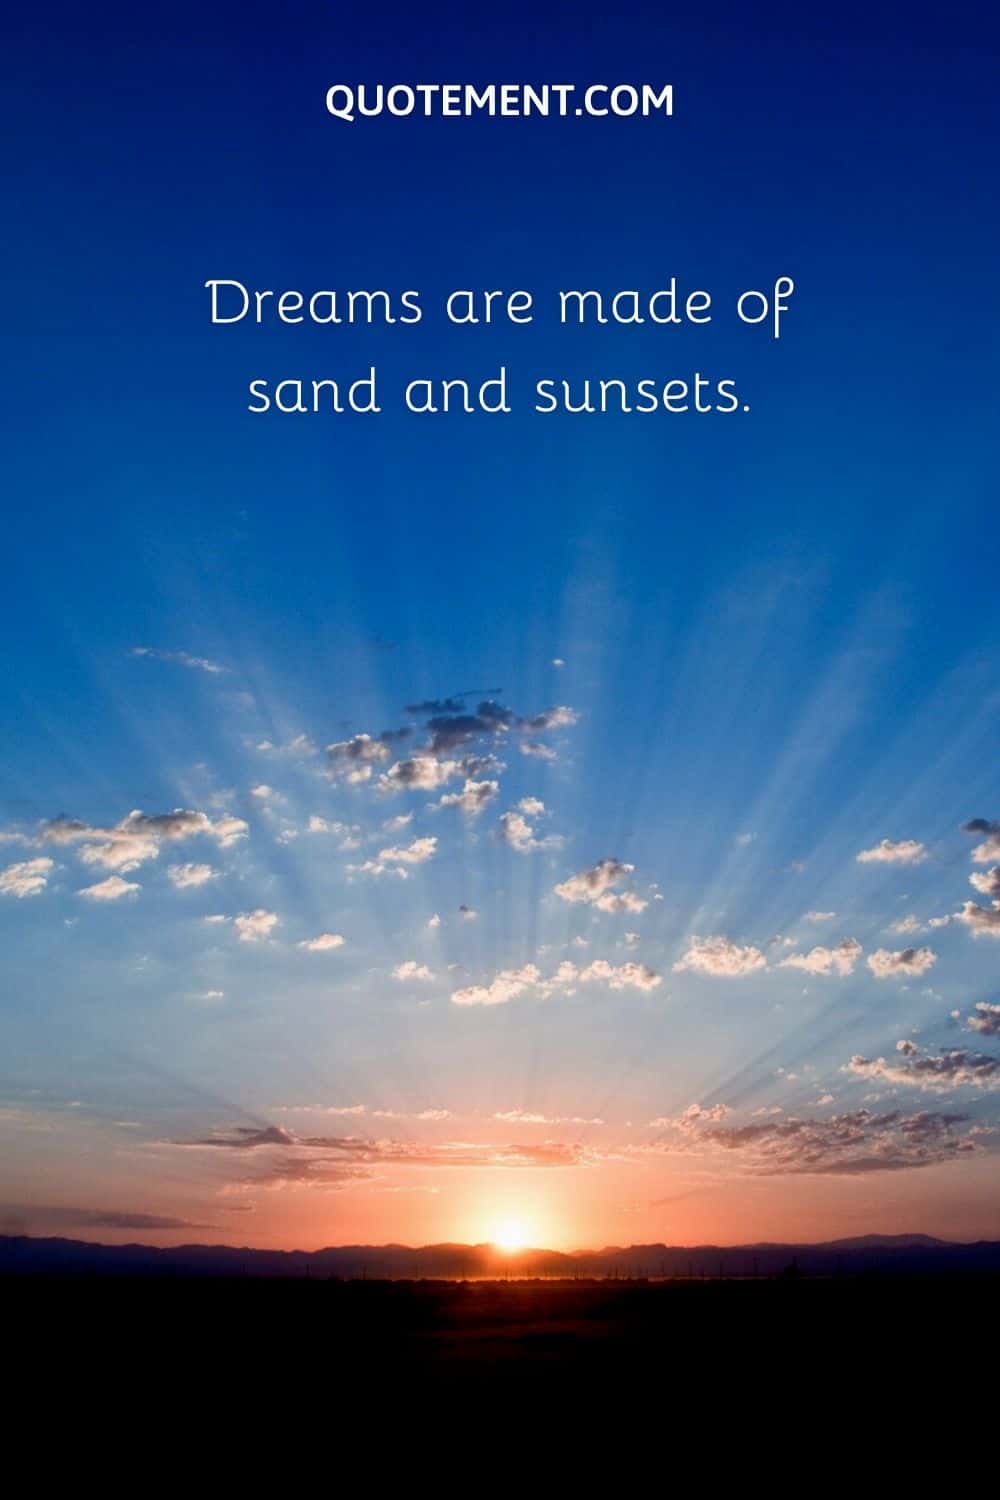 Dreams are made of sand and sunsets.